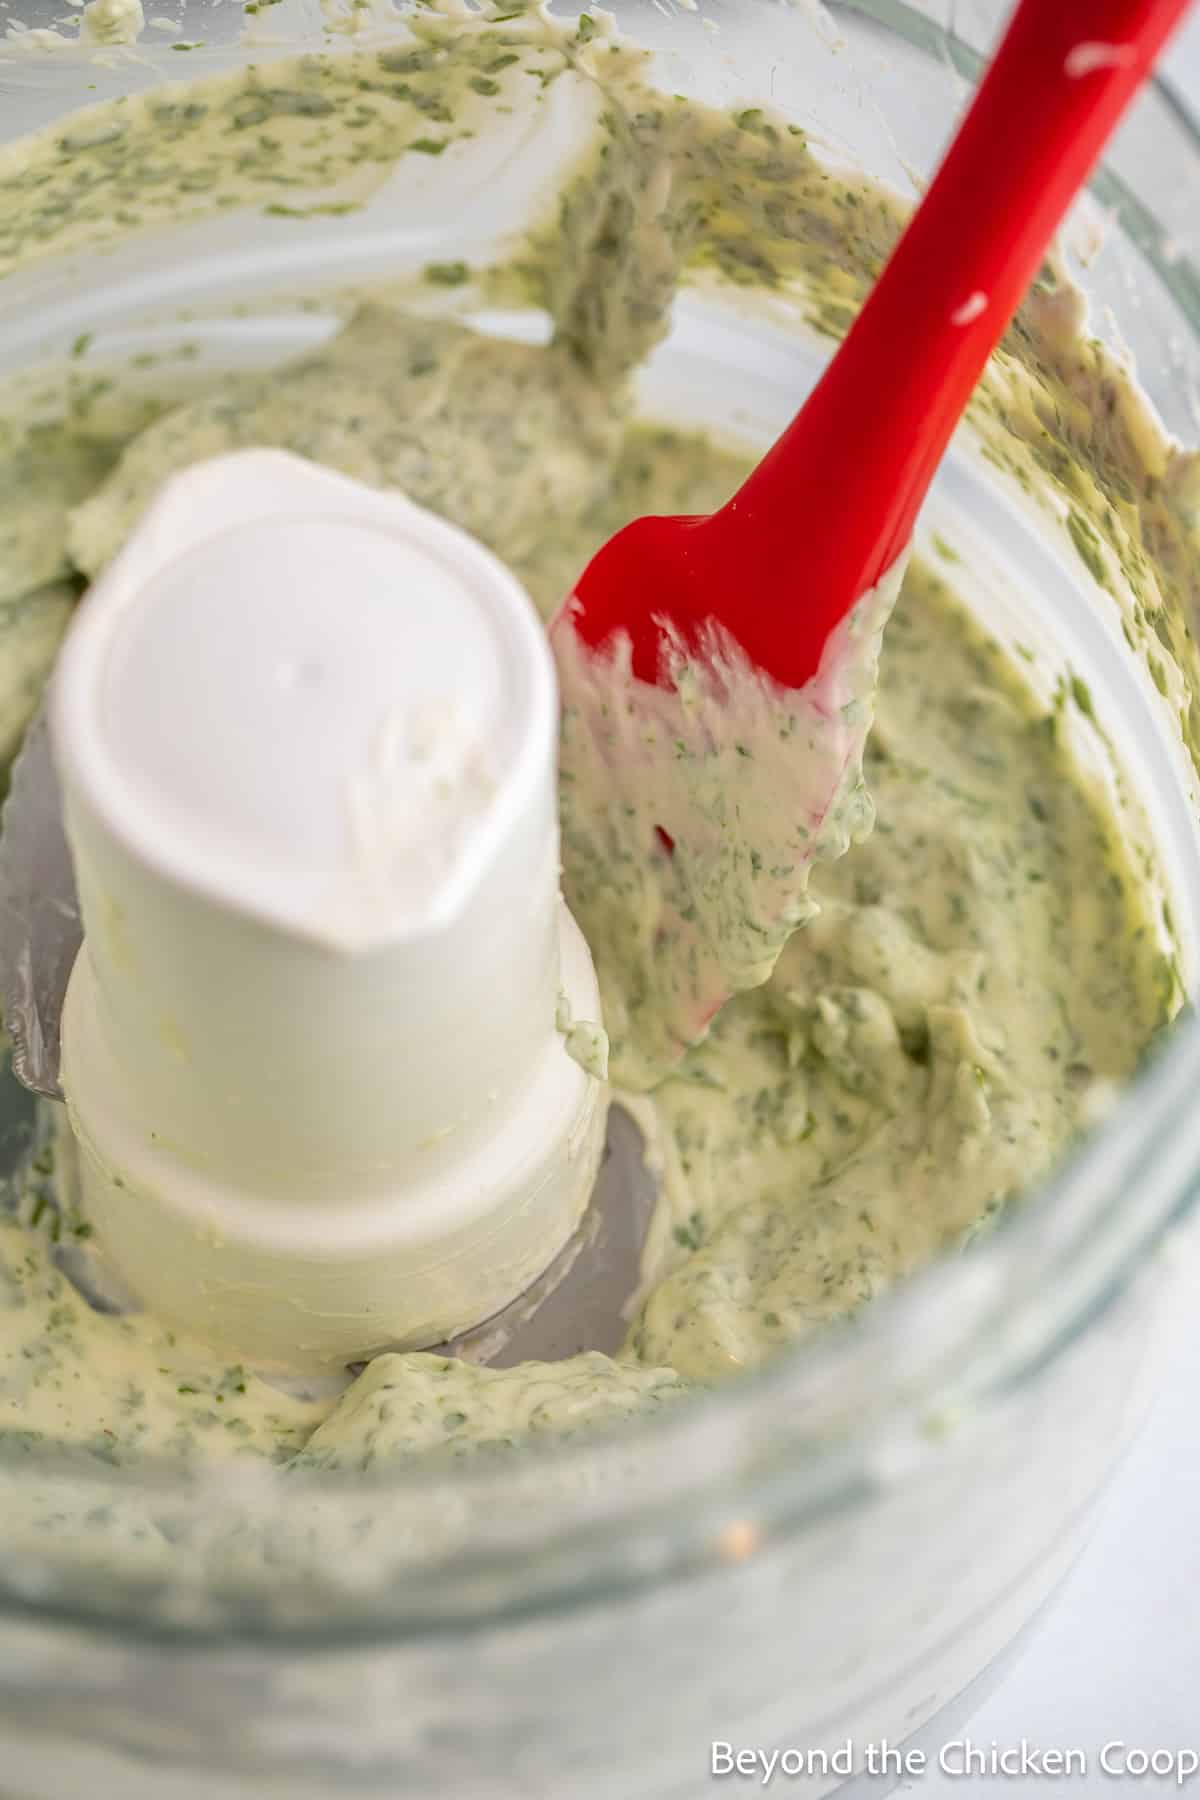 Basil mayo in a food processor with a red spatula. 